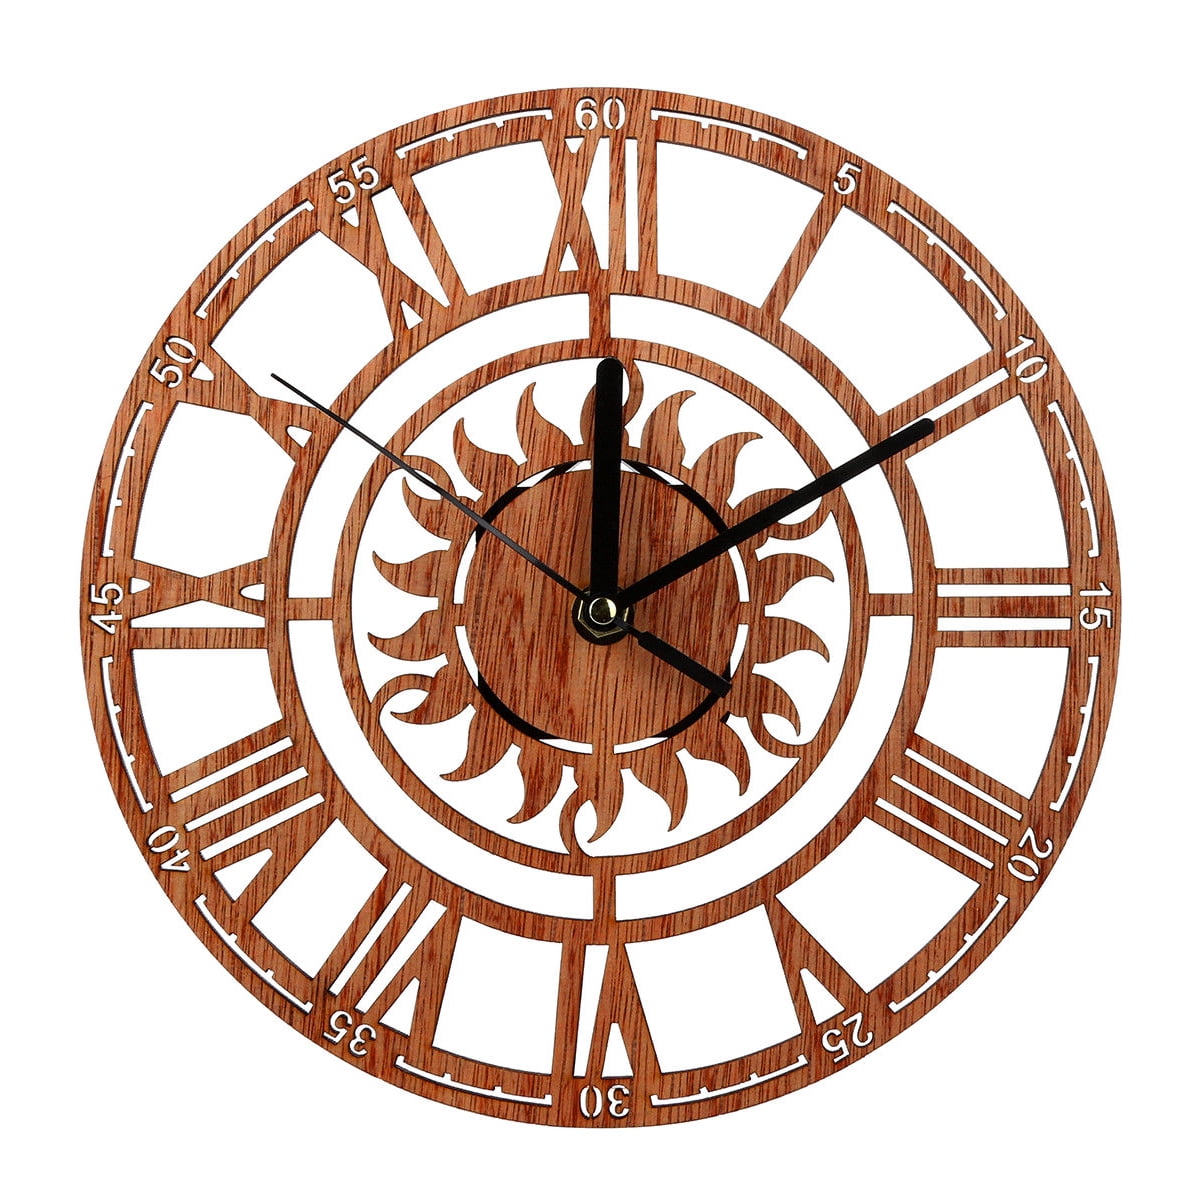 Vintage Wooden Wall Clock Large Shabby Chic Rustic Kitchen Home Antique Decor 